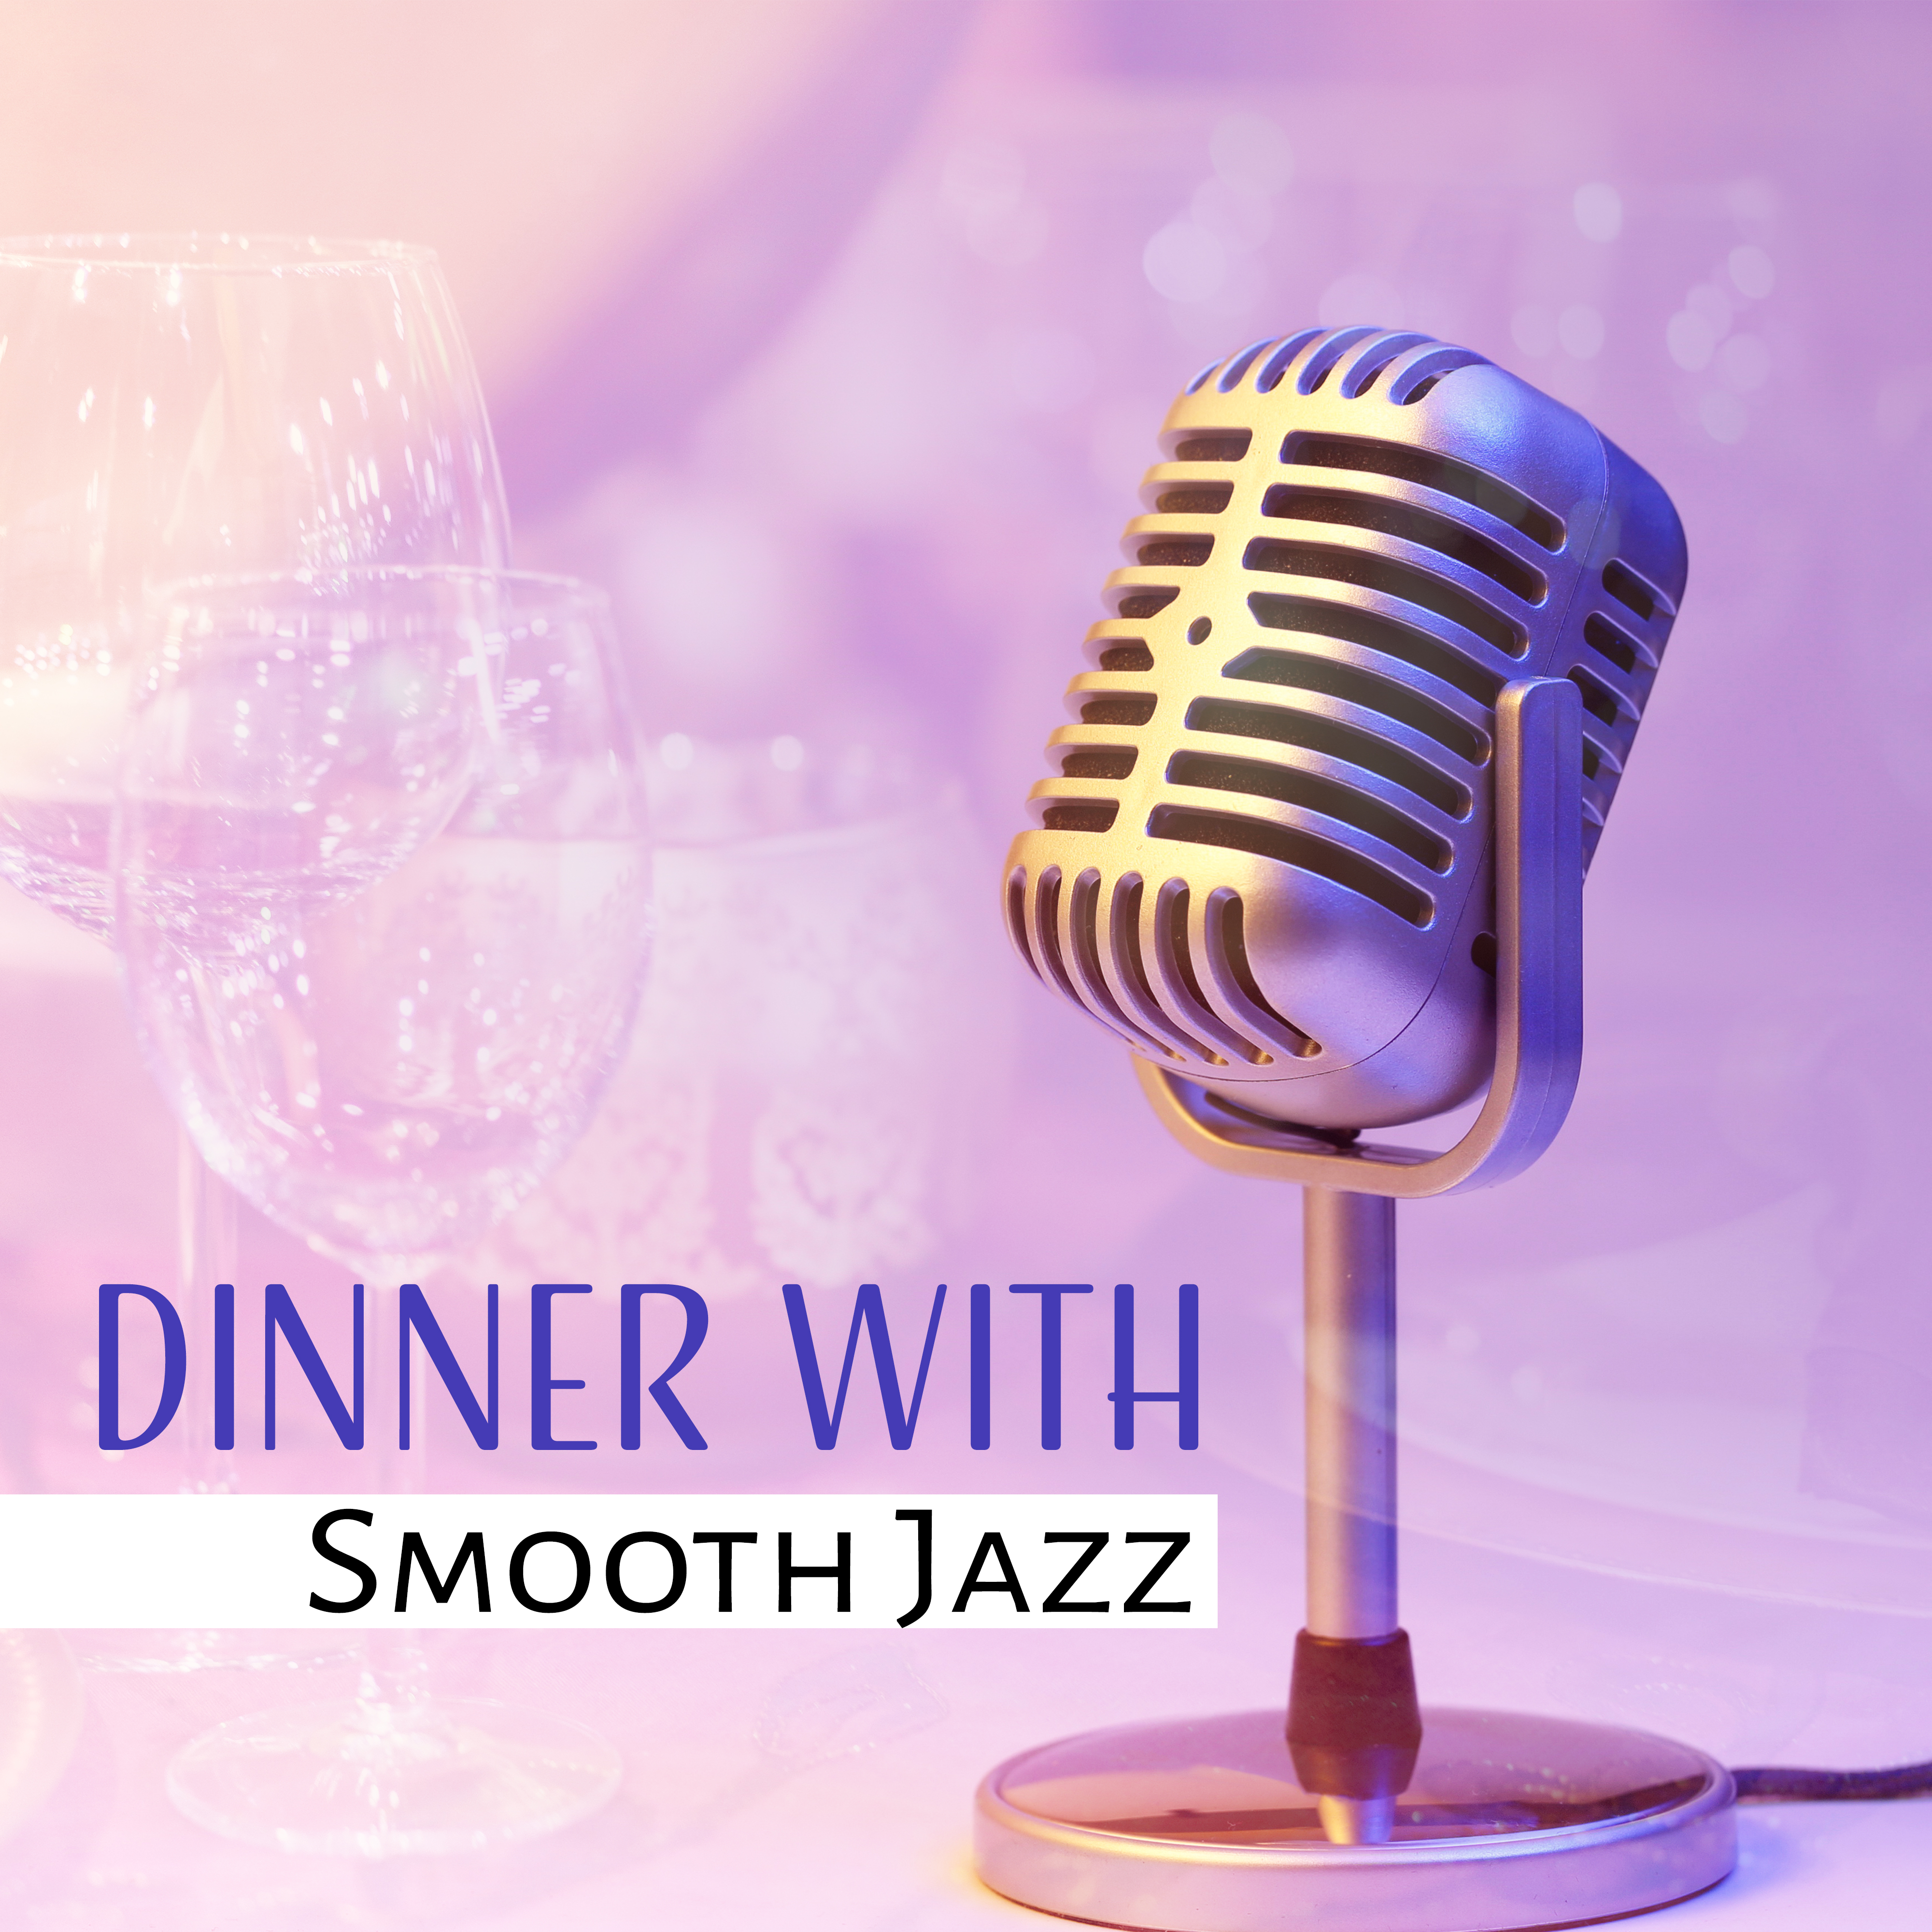 Dinner with Smooth Jazz